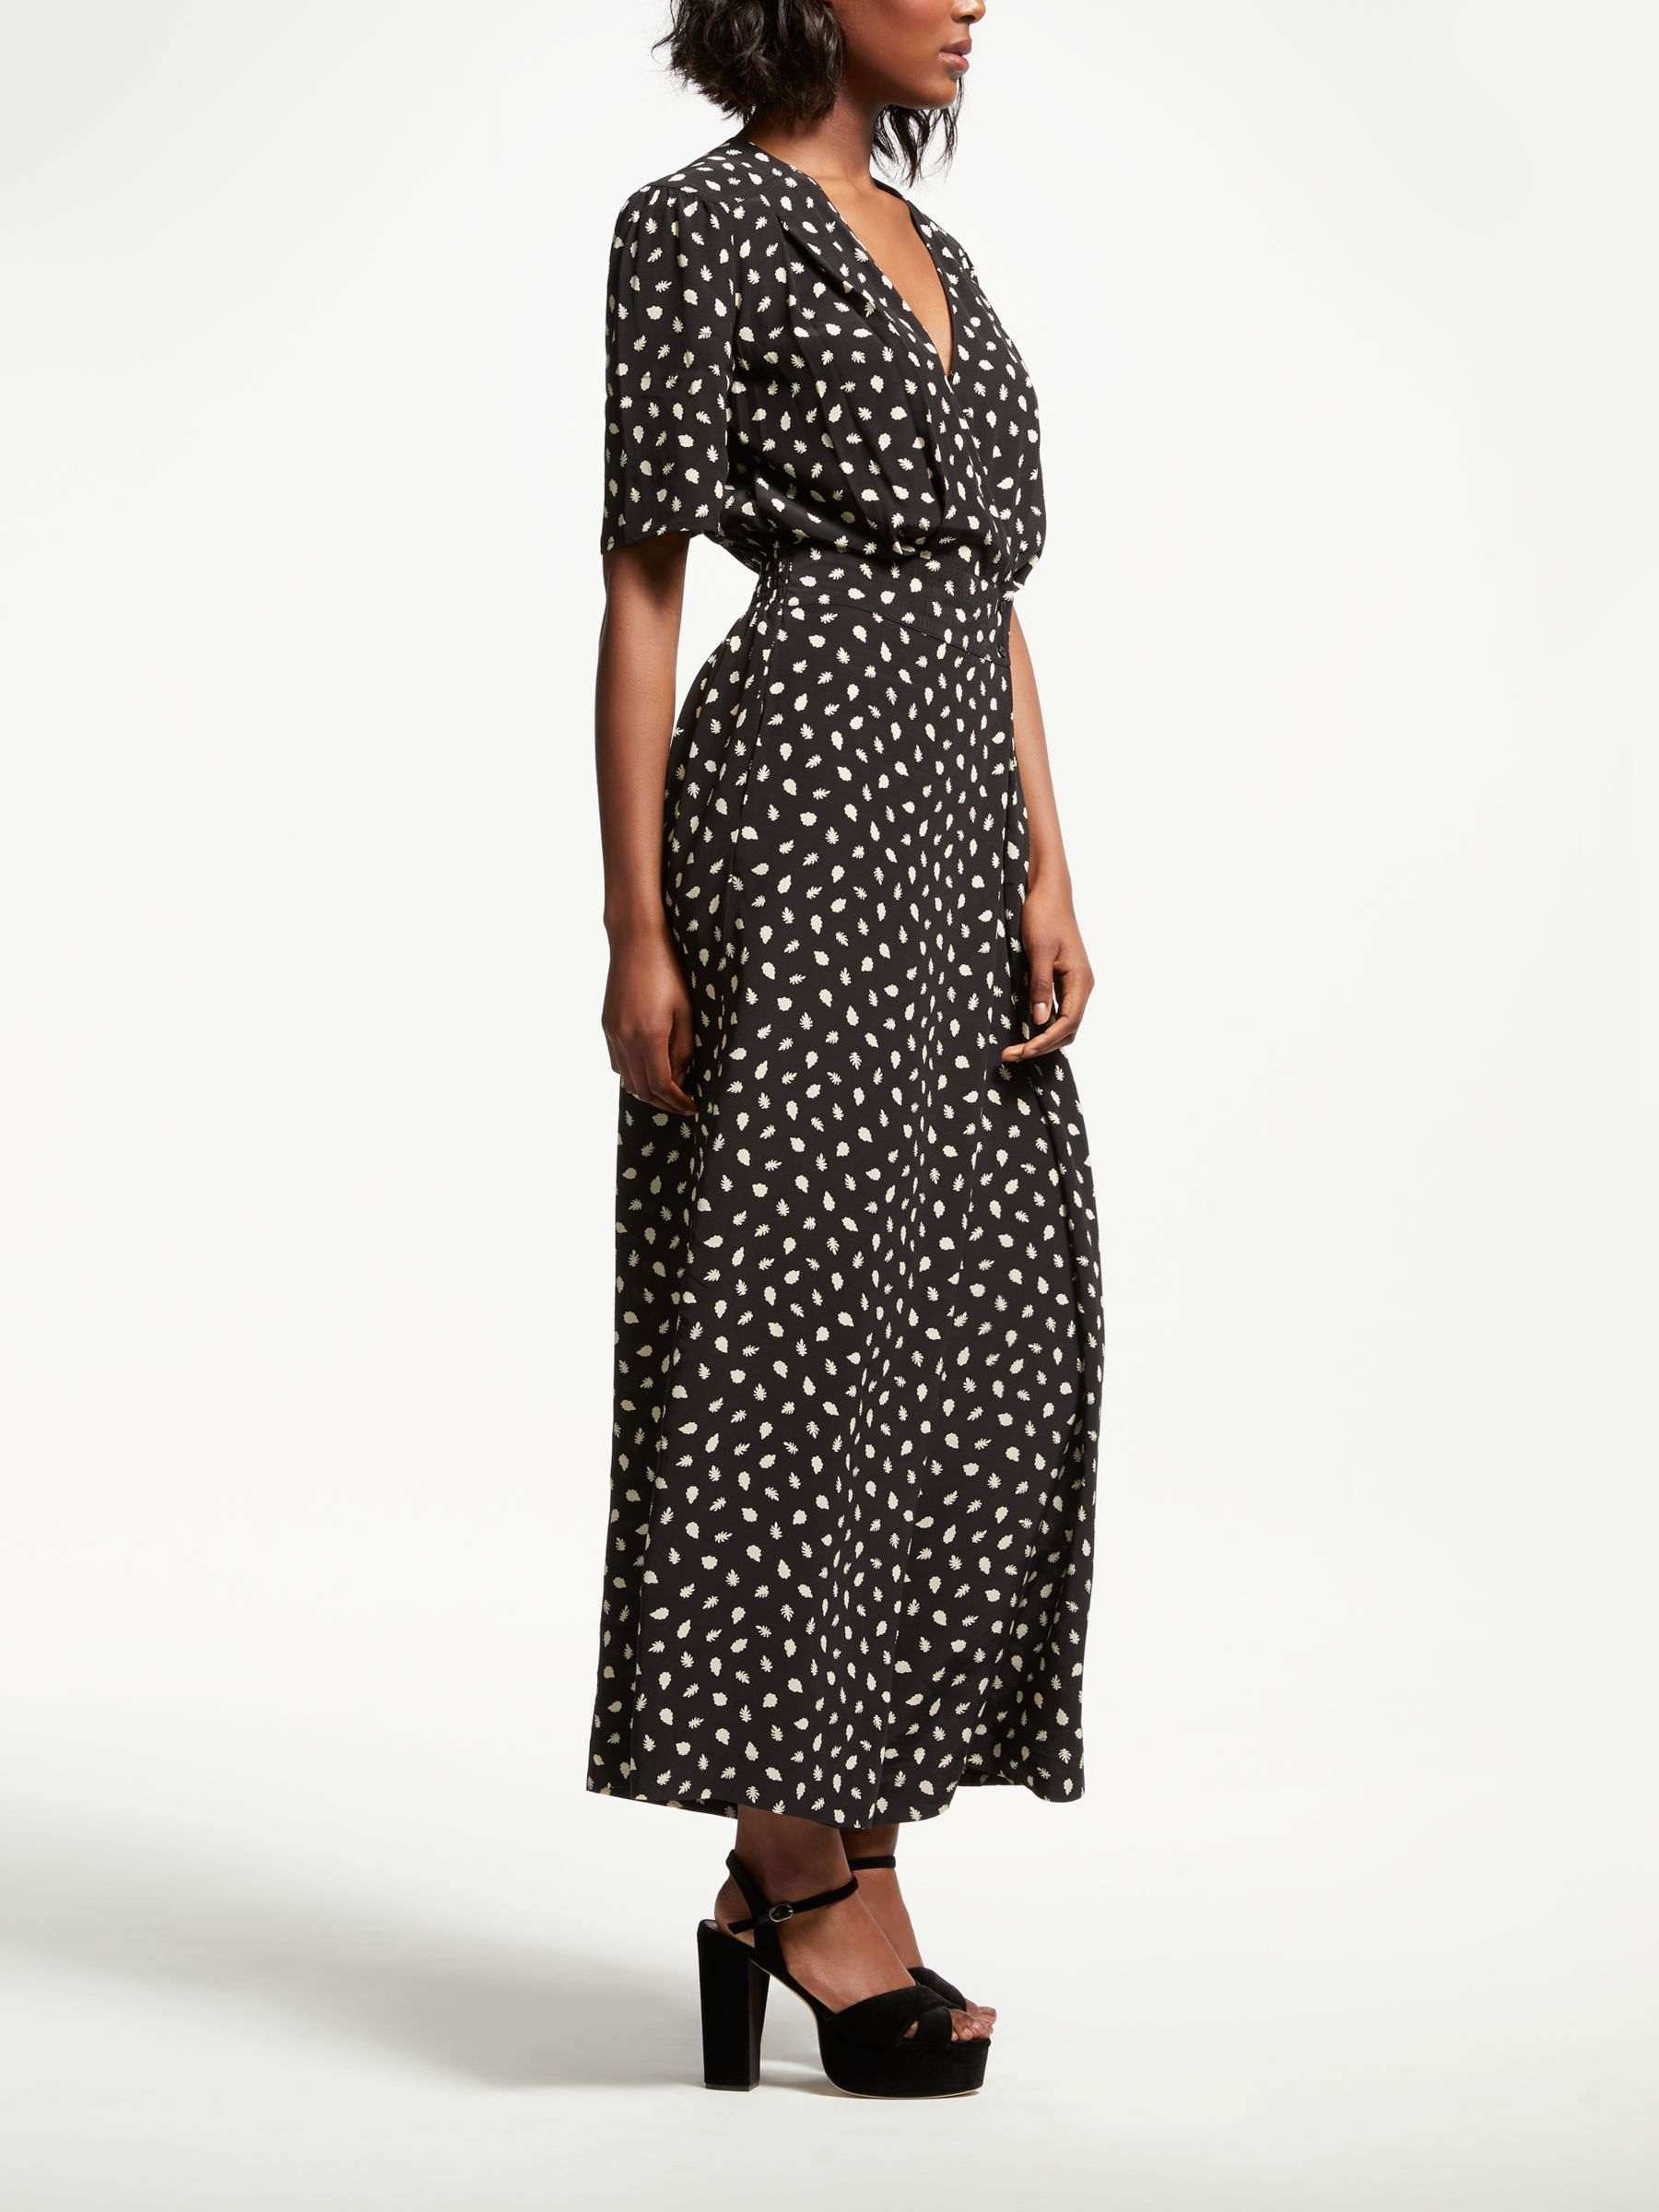 somerset by alice temperley jumpsuit